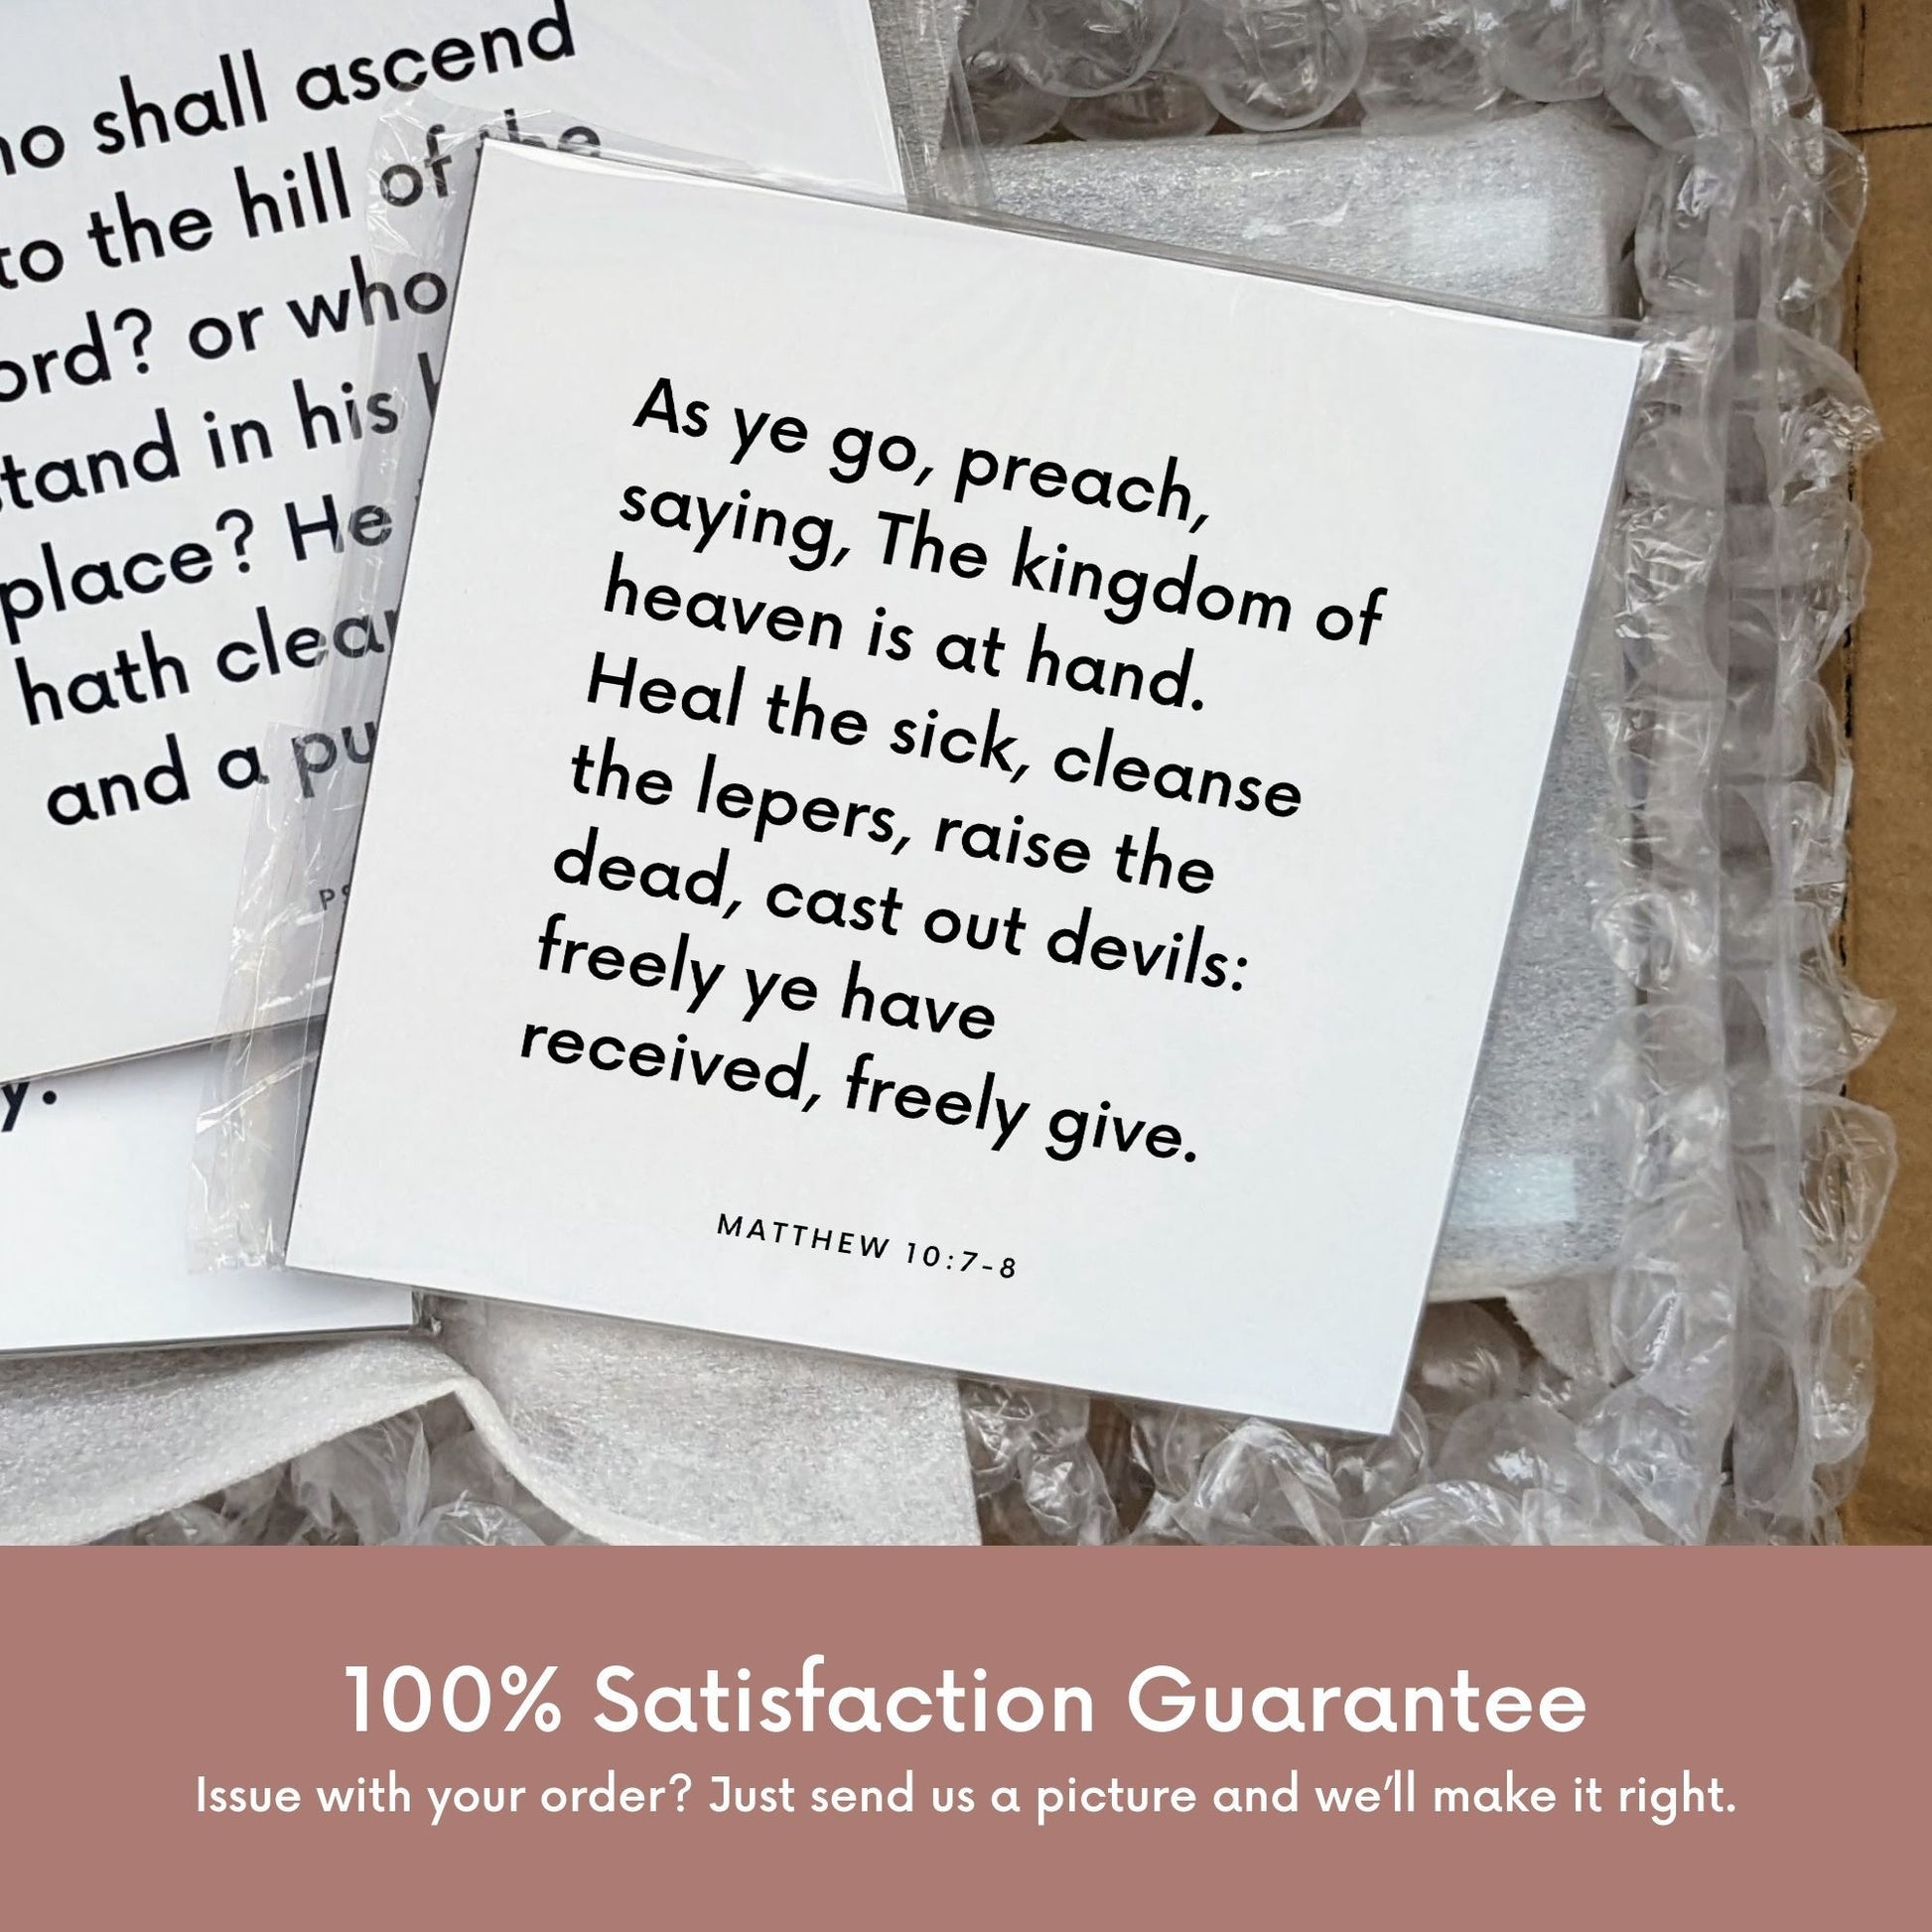 Shipping materials for scripture tile of Matthew 10:7-8 - "Freely ye have received, freely give"